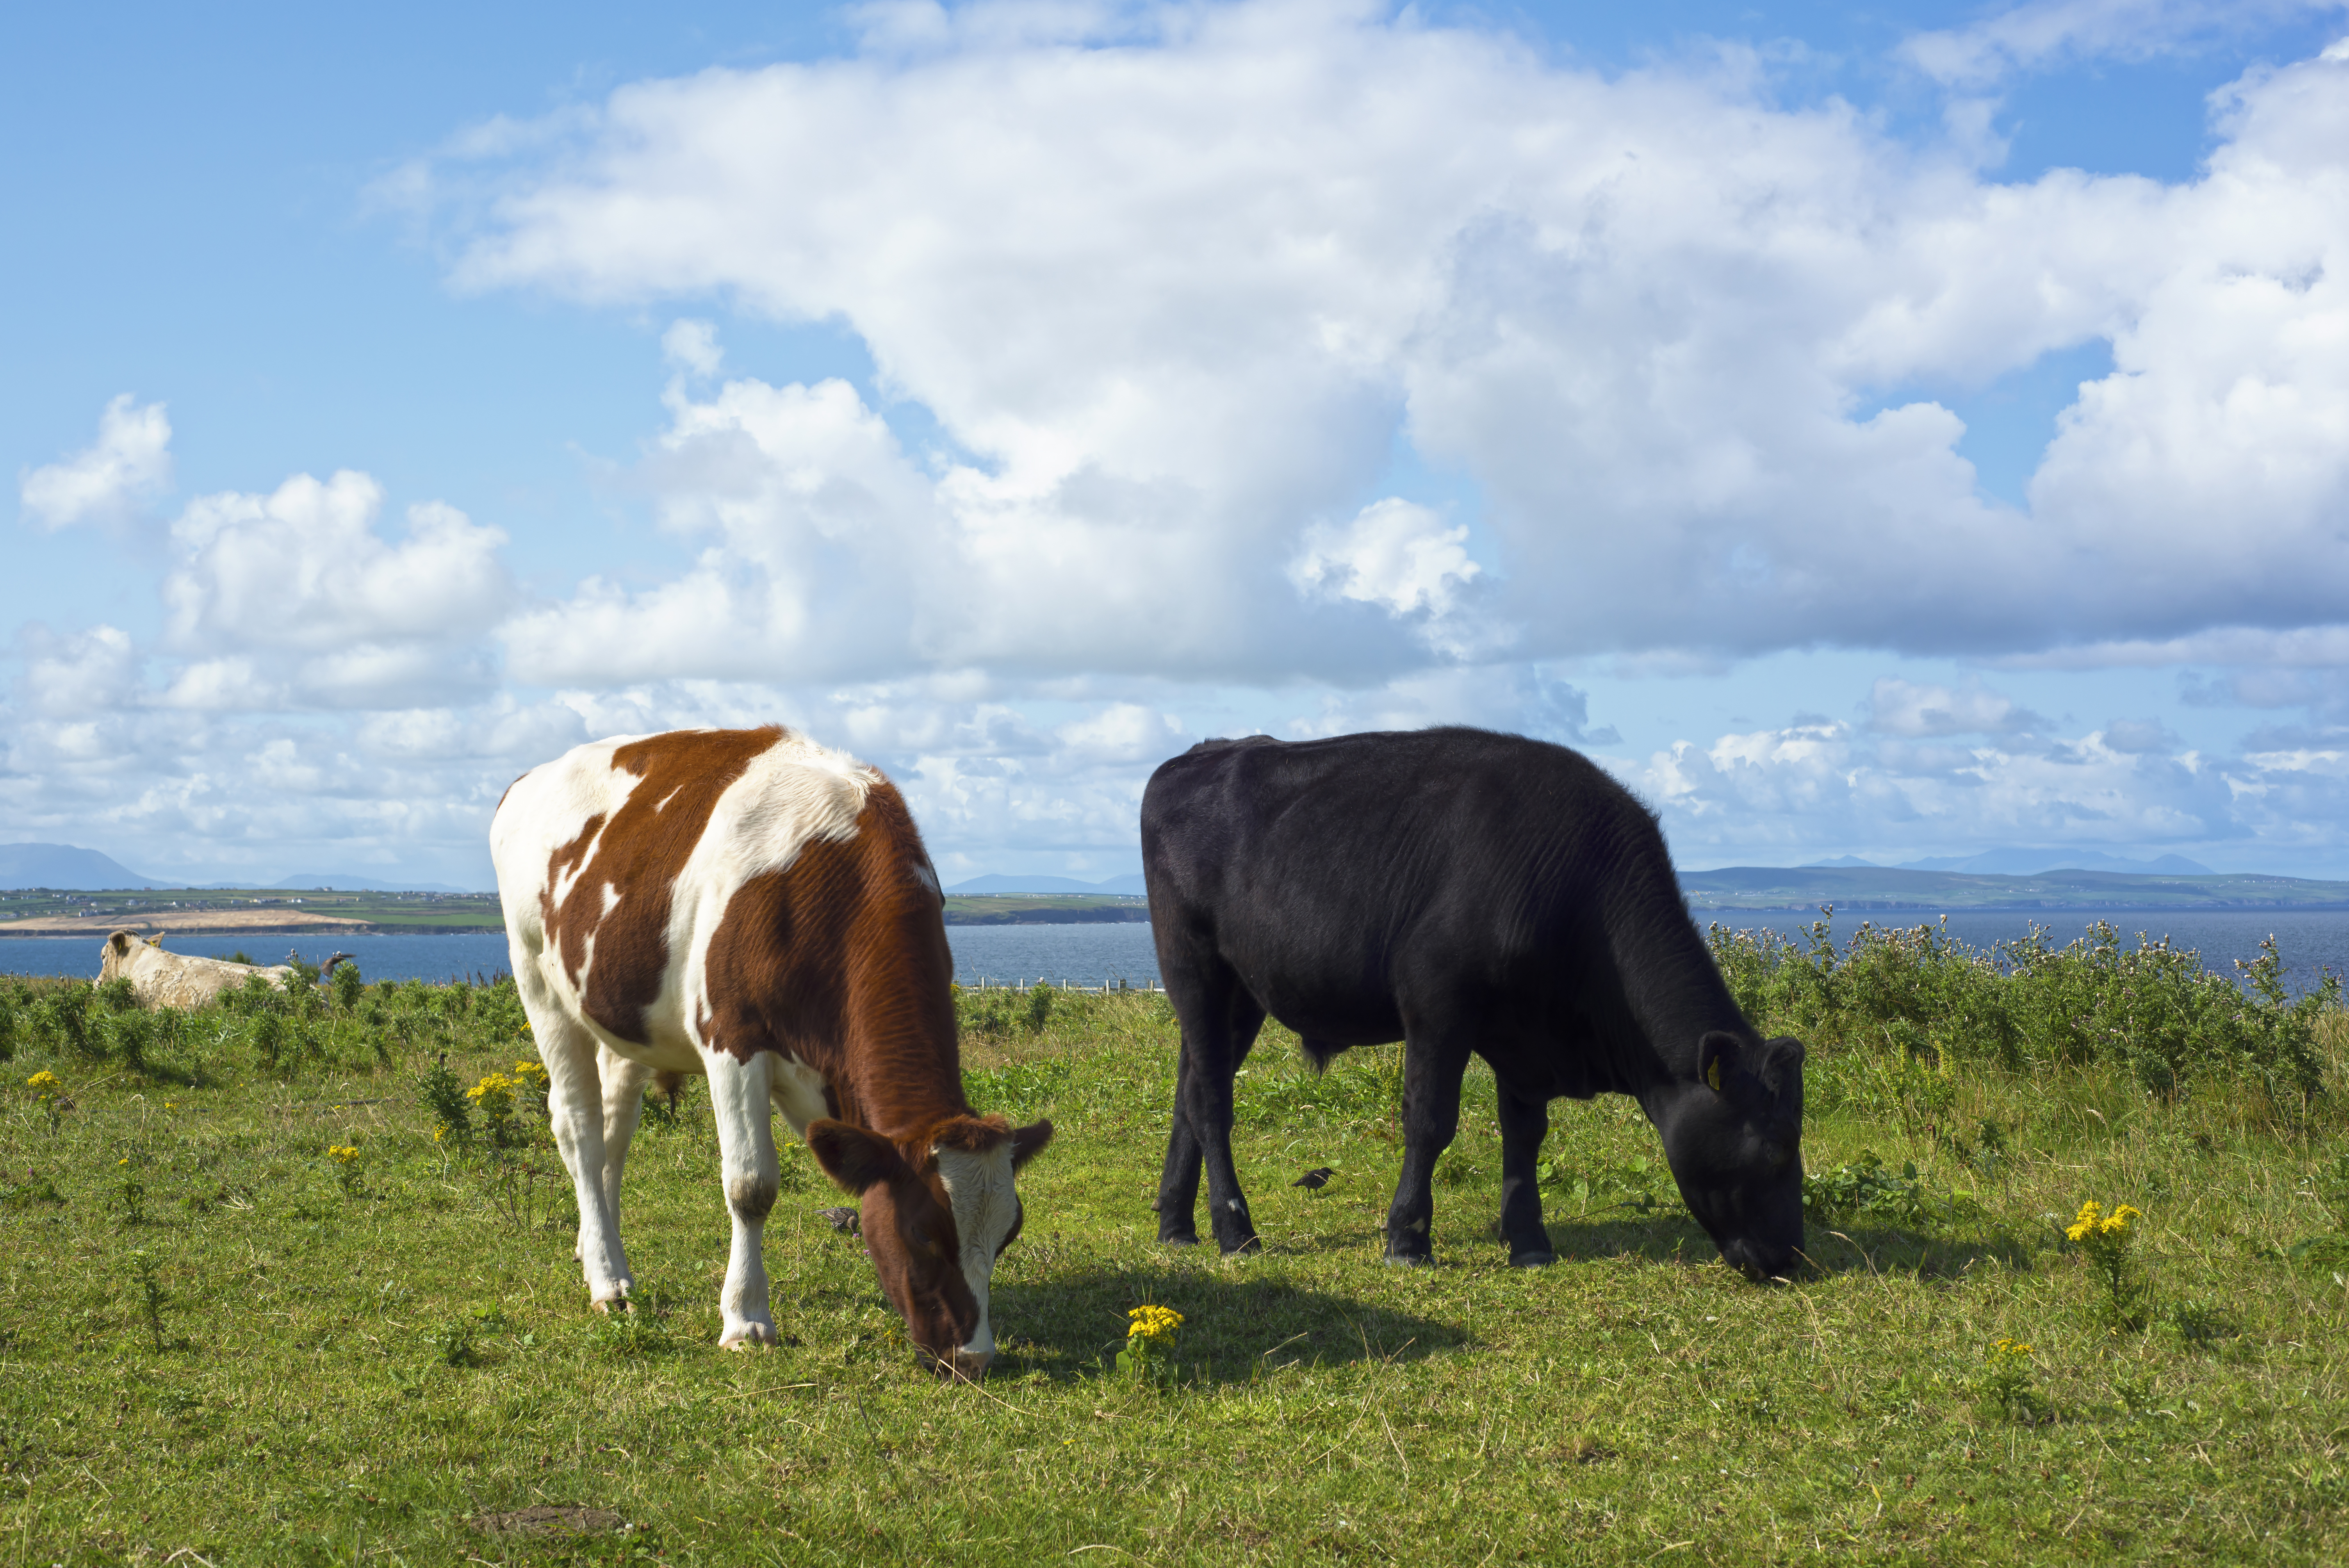 Image of two cows grazing on grass against a backdrop of a blue sky with clouds.